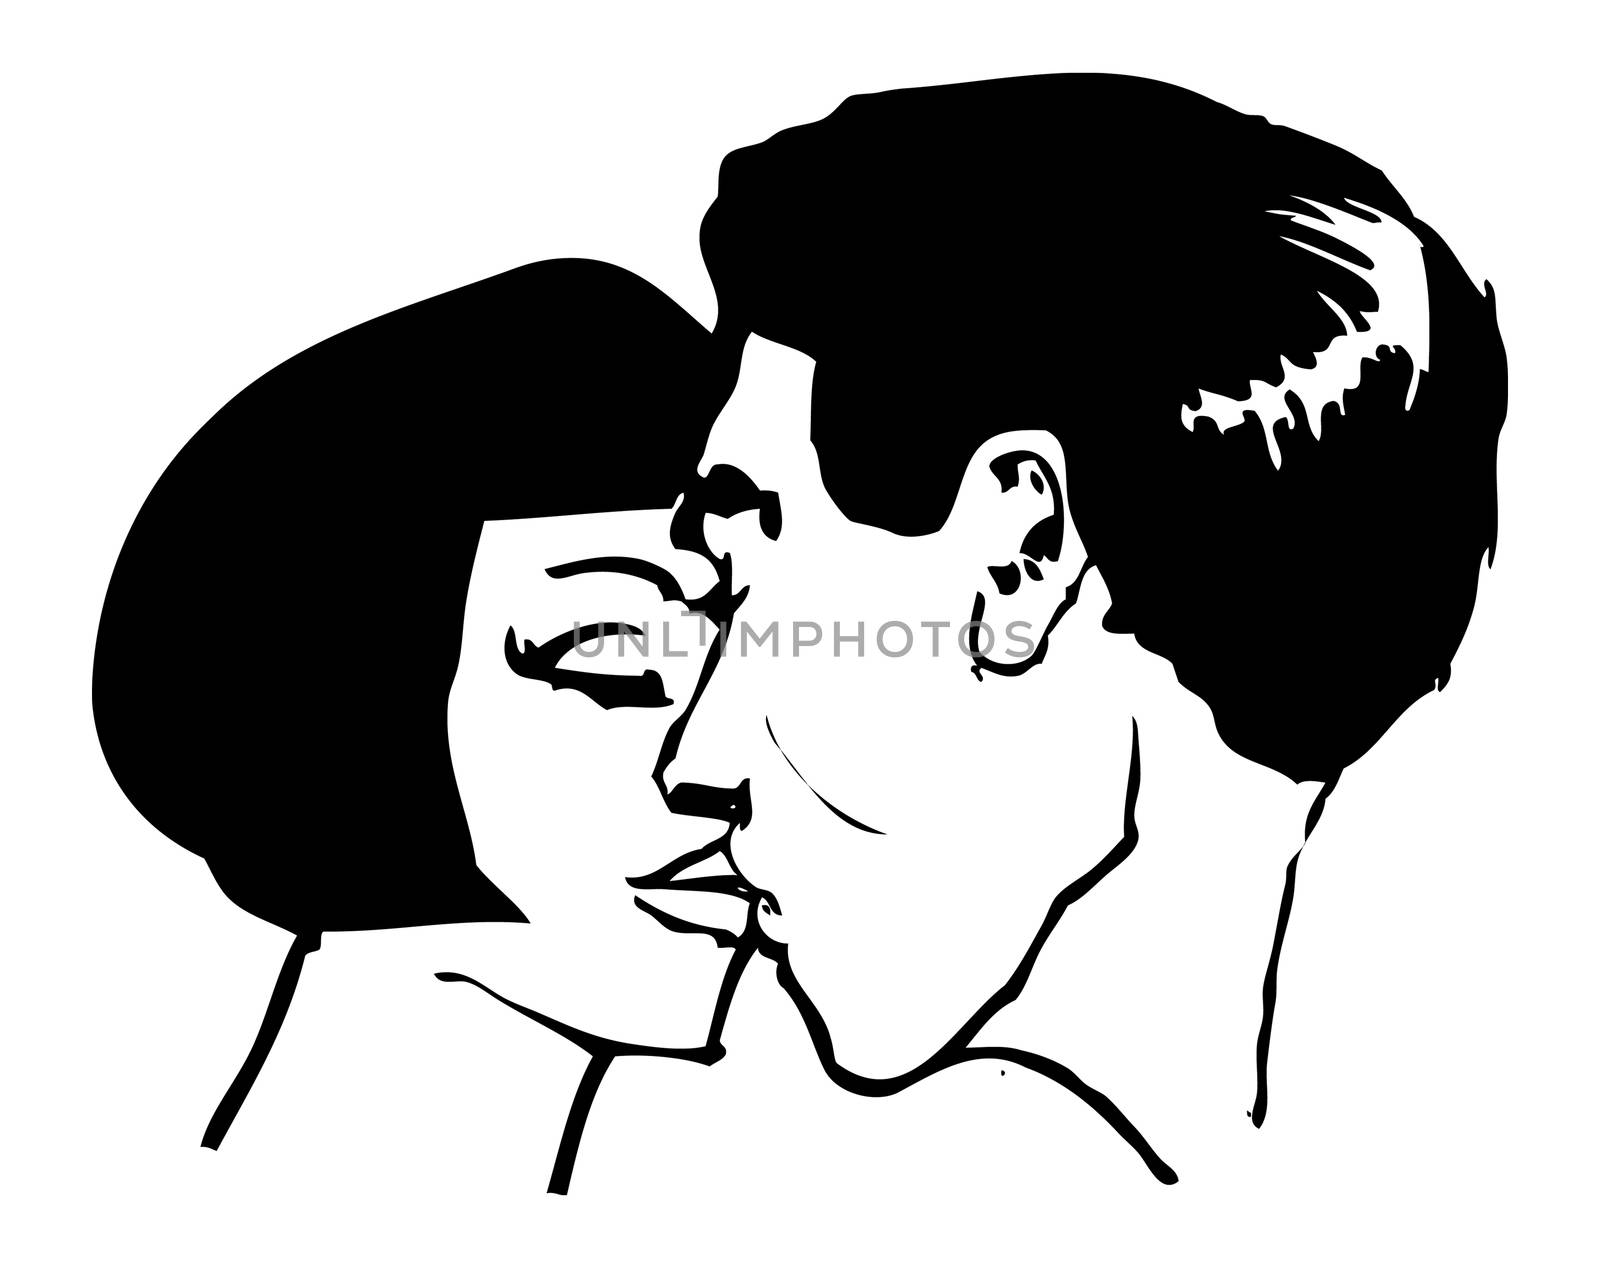 Kissing man and woman Couple in love pop art vector illustration